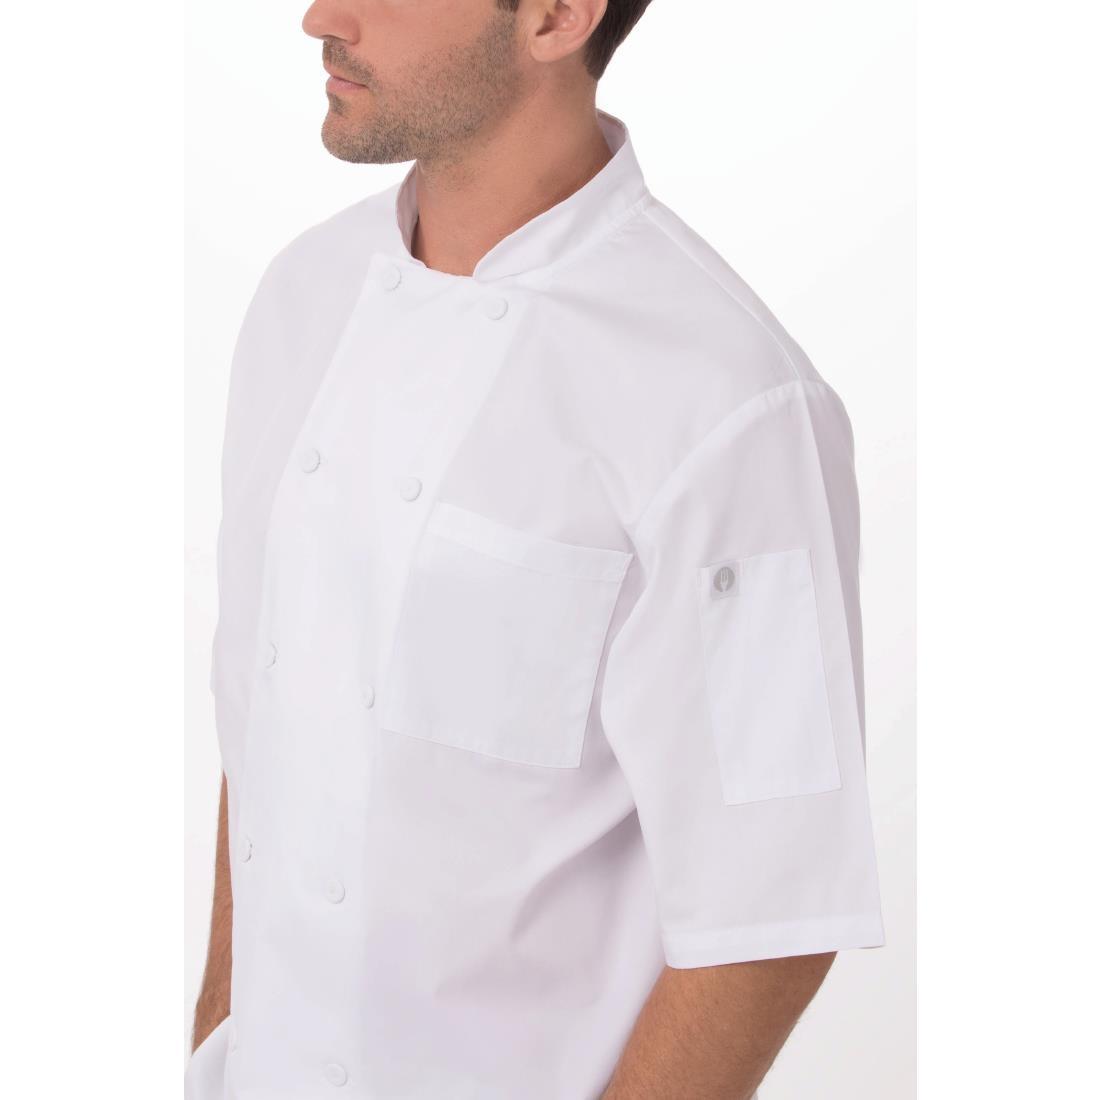 Chefs Works Montreal Cool Vent Unisex Short Sleeve Chefs Jacket White 4XL - A914-4XL  - 6